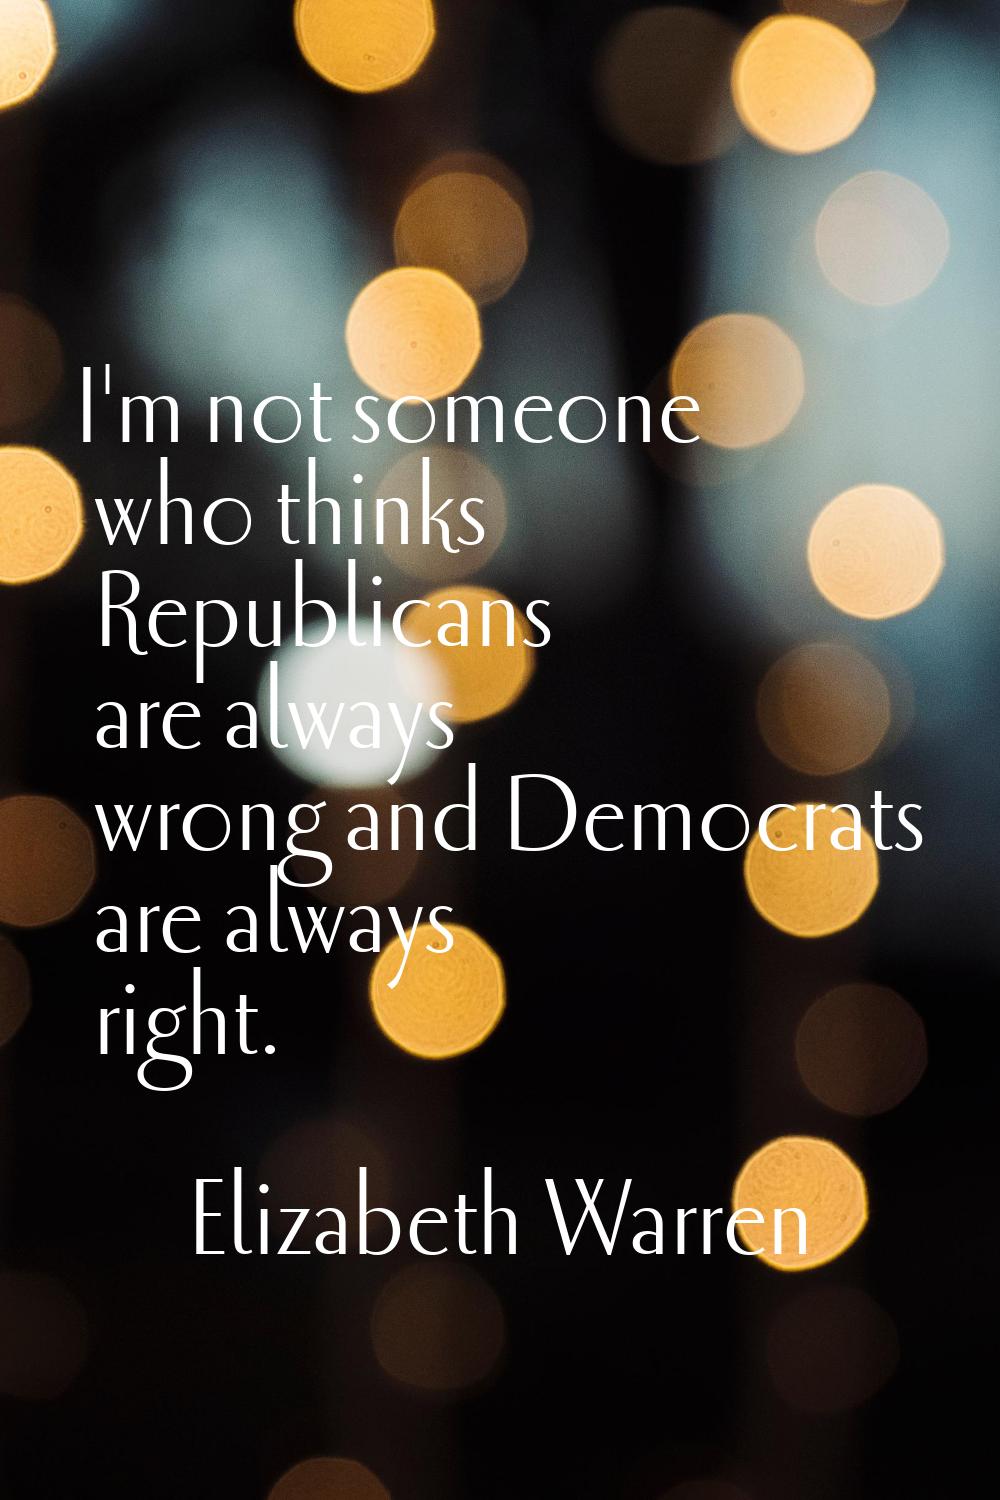 I'm not someone who thinks Republicans are always wrong and Democrats are always right.